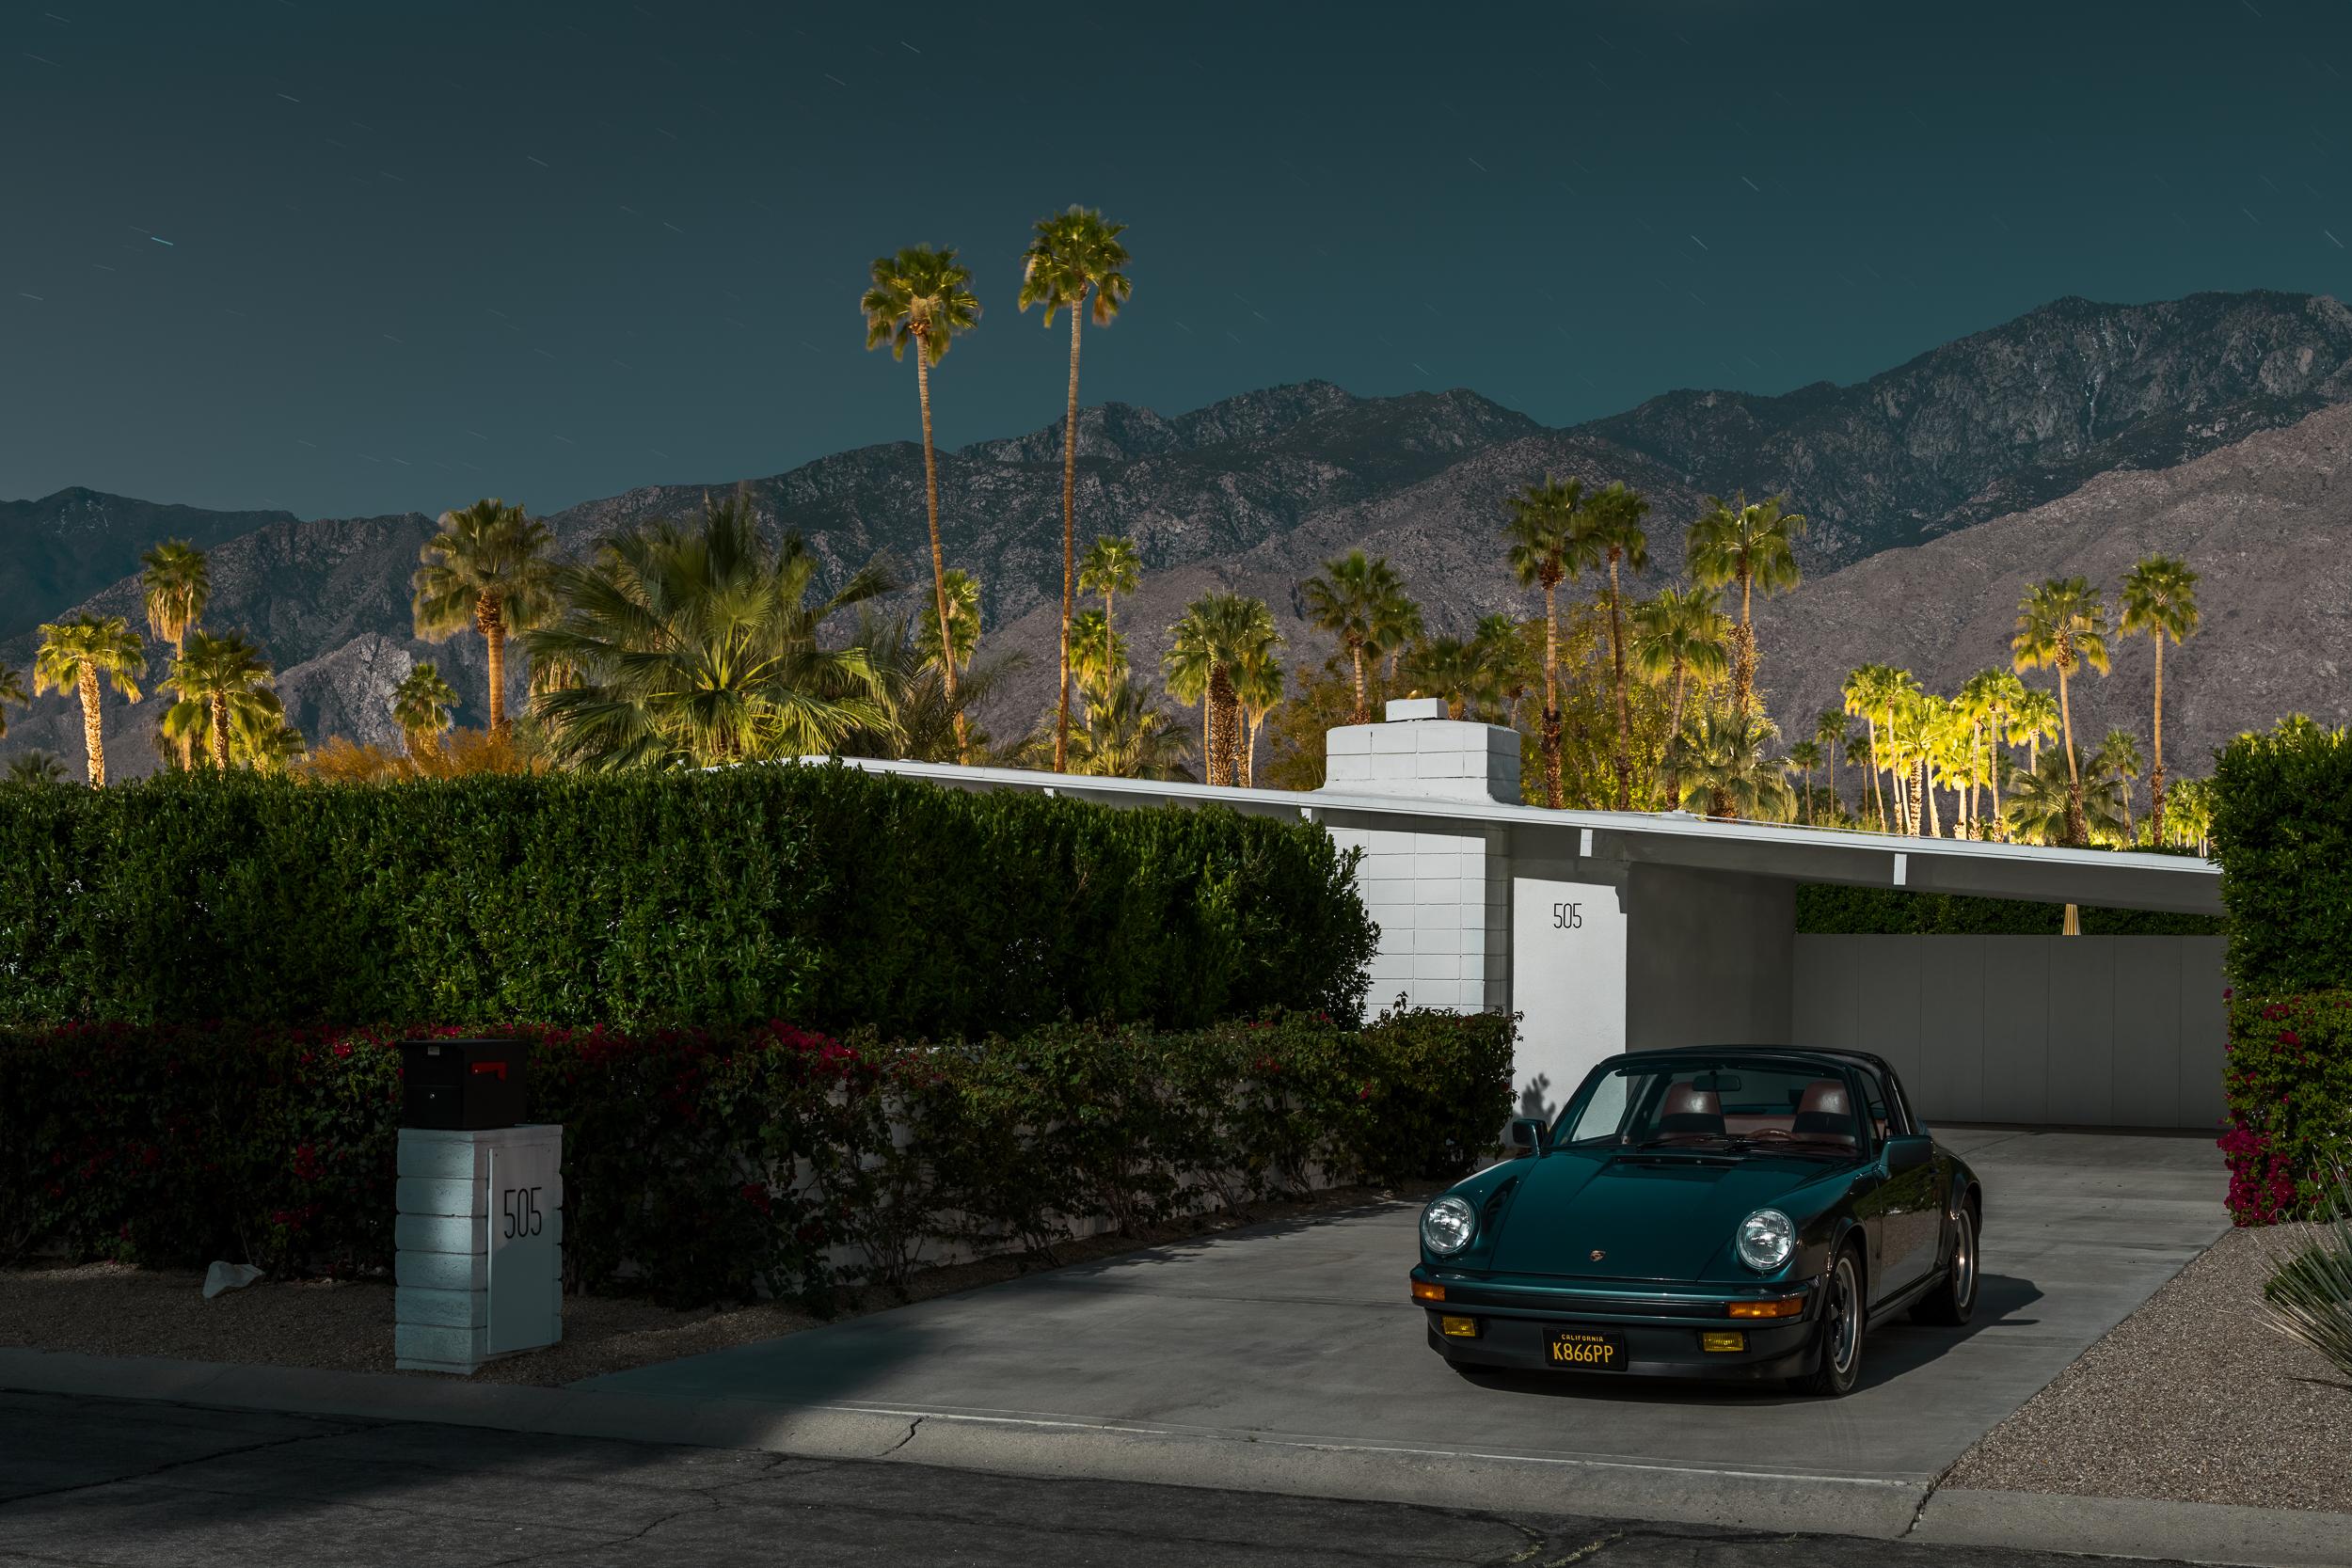 The latest and final release in Australian photographer Tom Blachford’s long-running project, Midnight Modern, will be exhibited for the first time at TOTH Gallery in New York.

Loosening the shackles of Palm Springs and Mid Century, Blachford’s